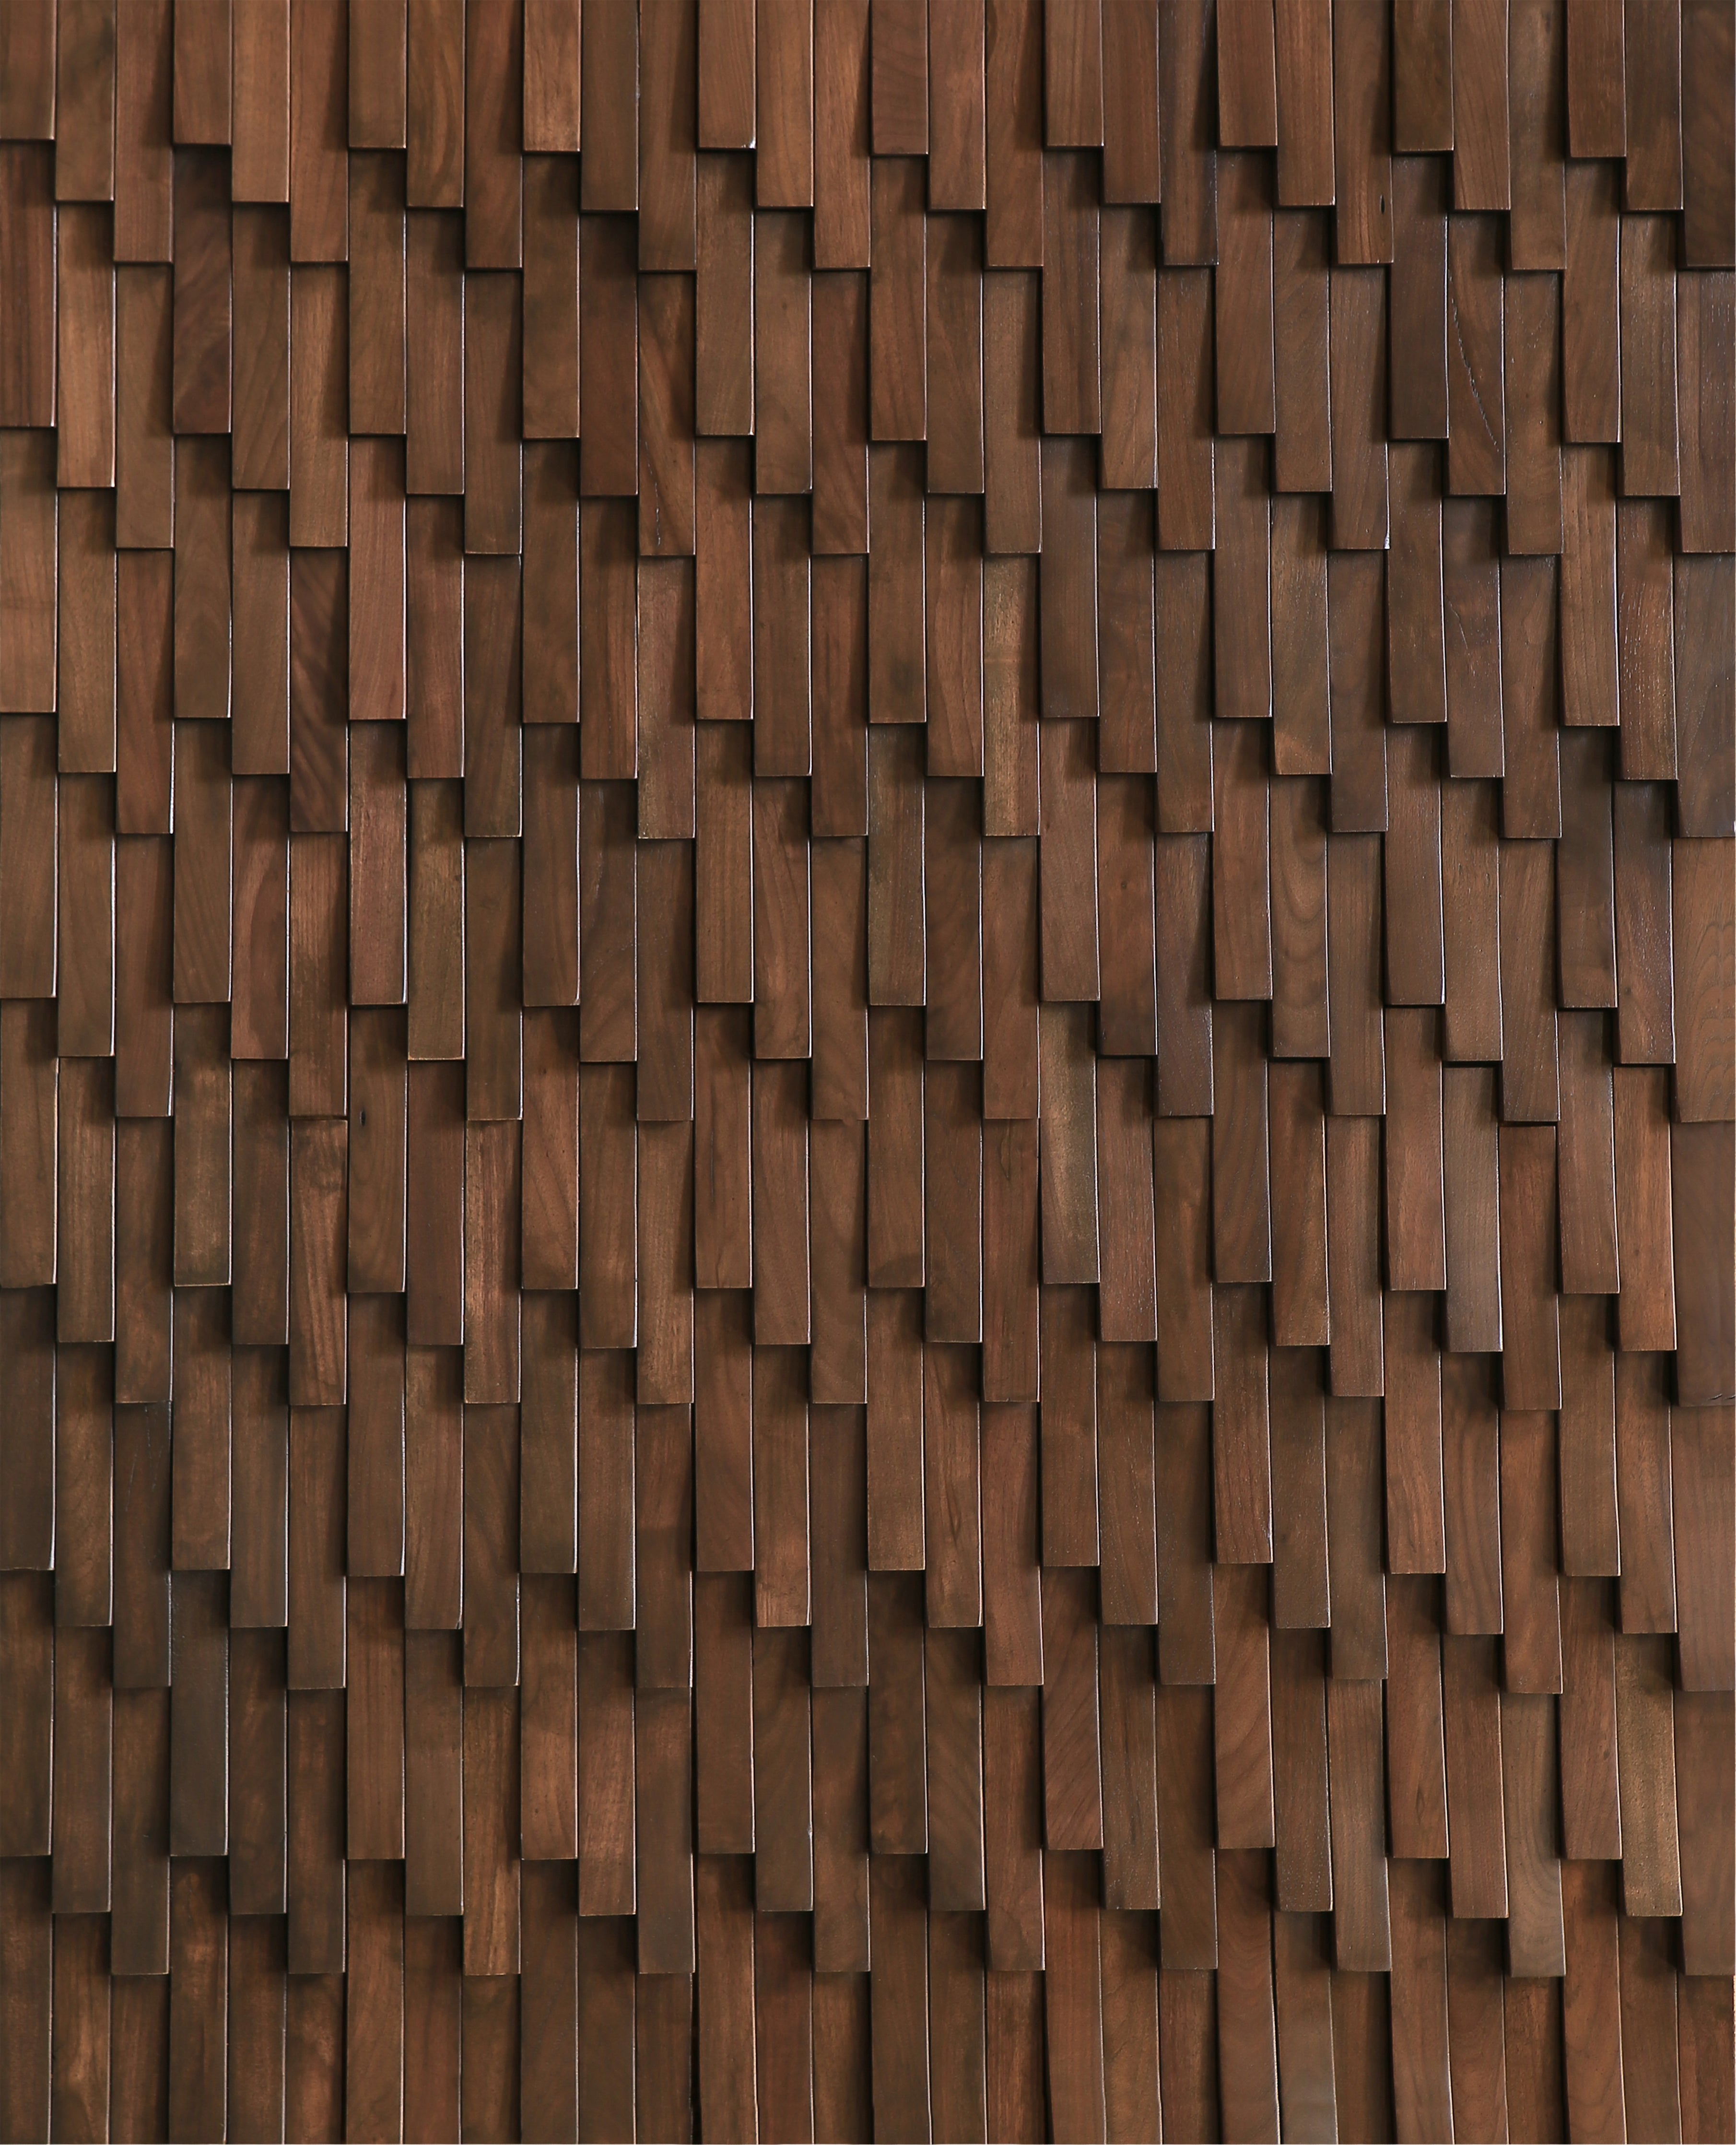 duchateau inceptiv wave stout walnut three dimensional wall natural wood panel conversion varnish for interior use distributed by surface group international